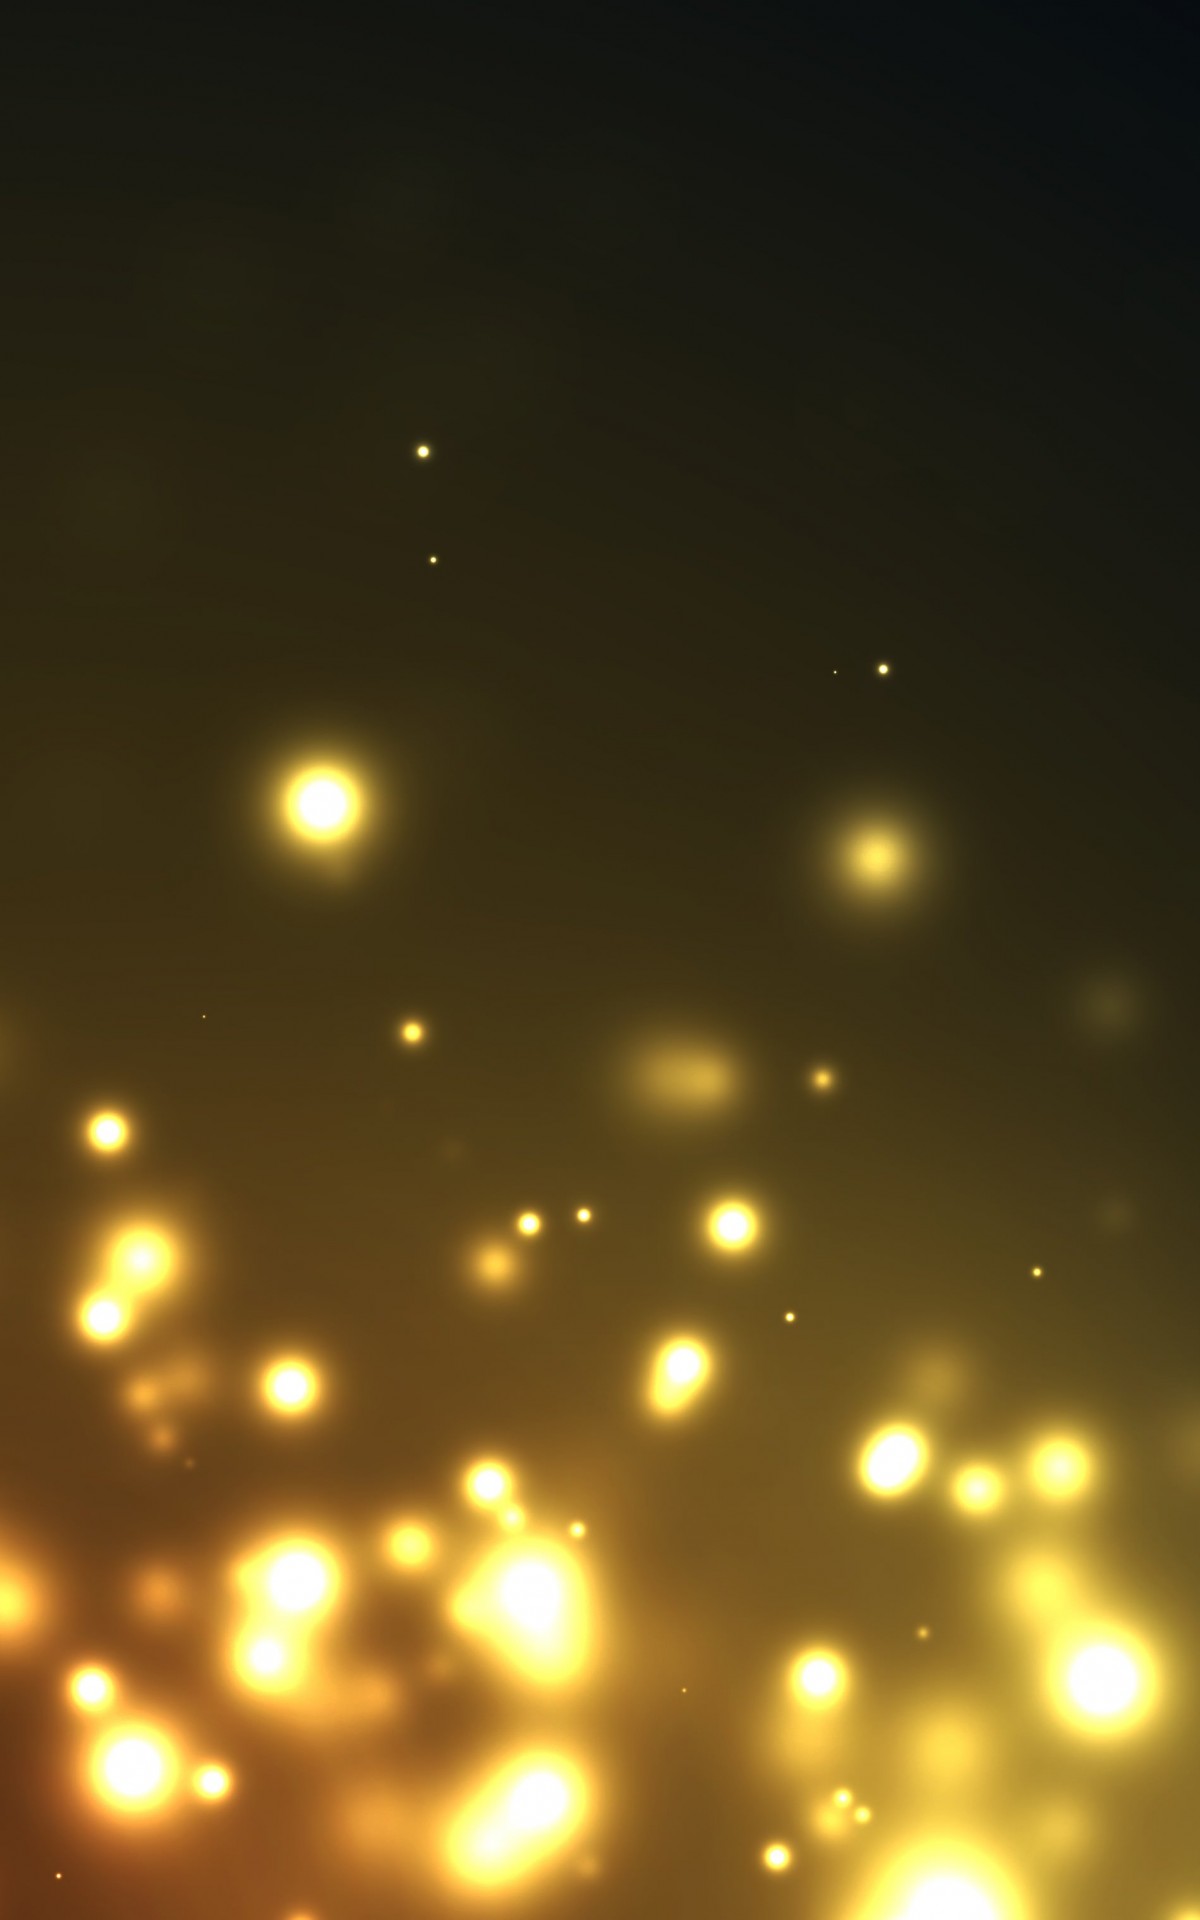 Floating Particles Wallpaper for Amazon Kindle Fire HDX